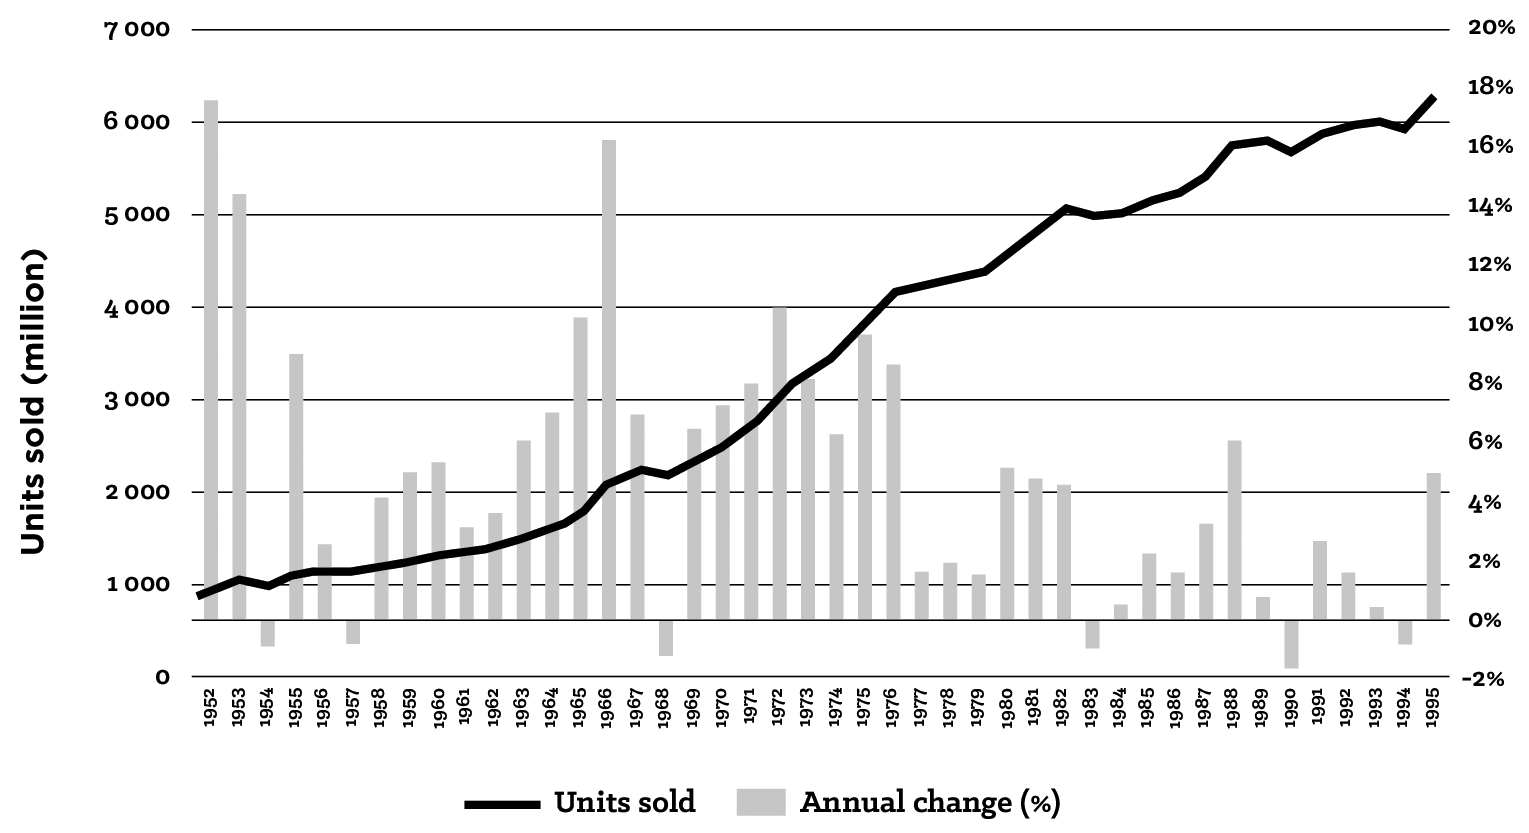 Figure 5.2: Johannesburg Electricity Undertaking Annual Sales (1952 to 1995)